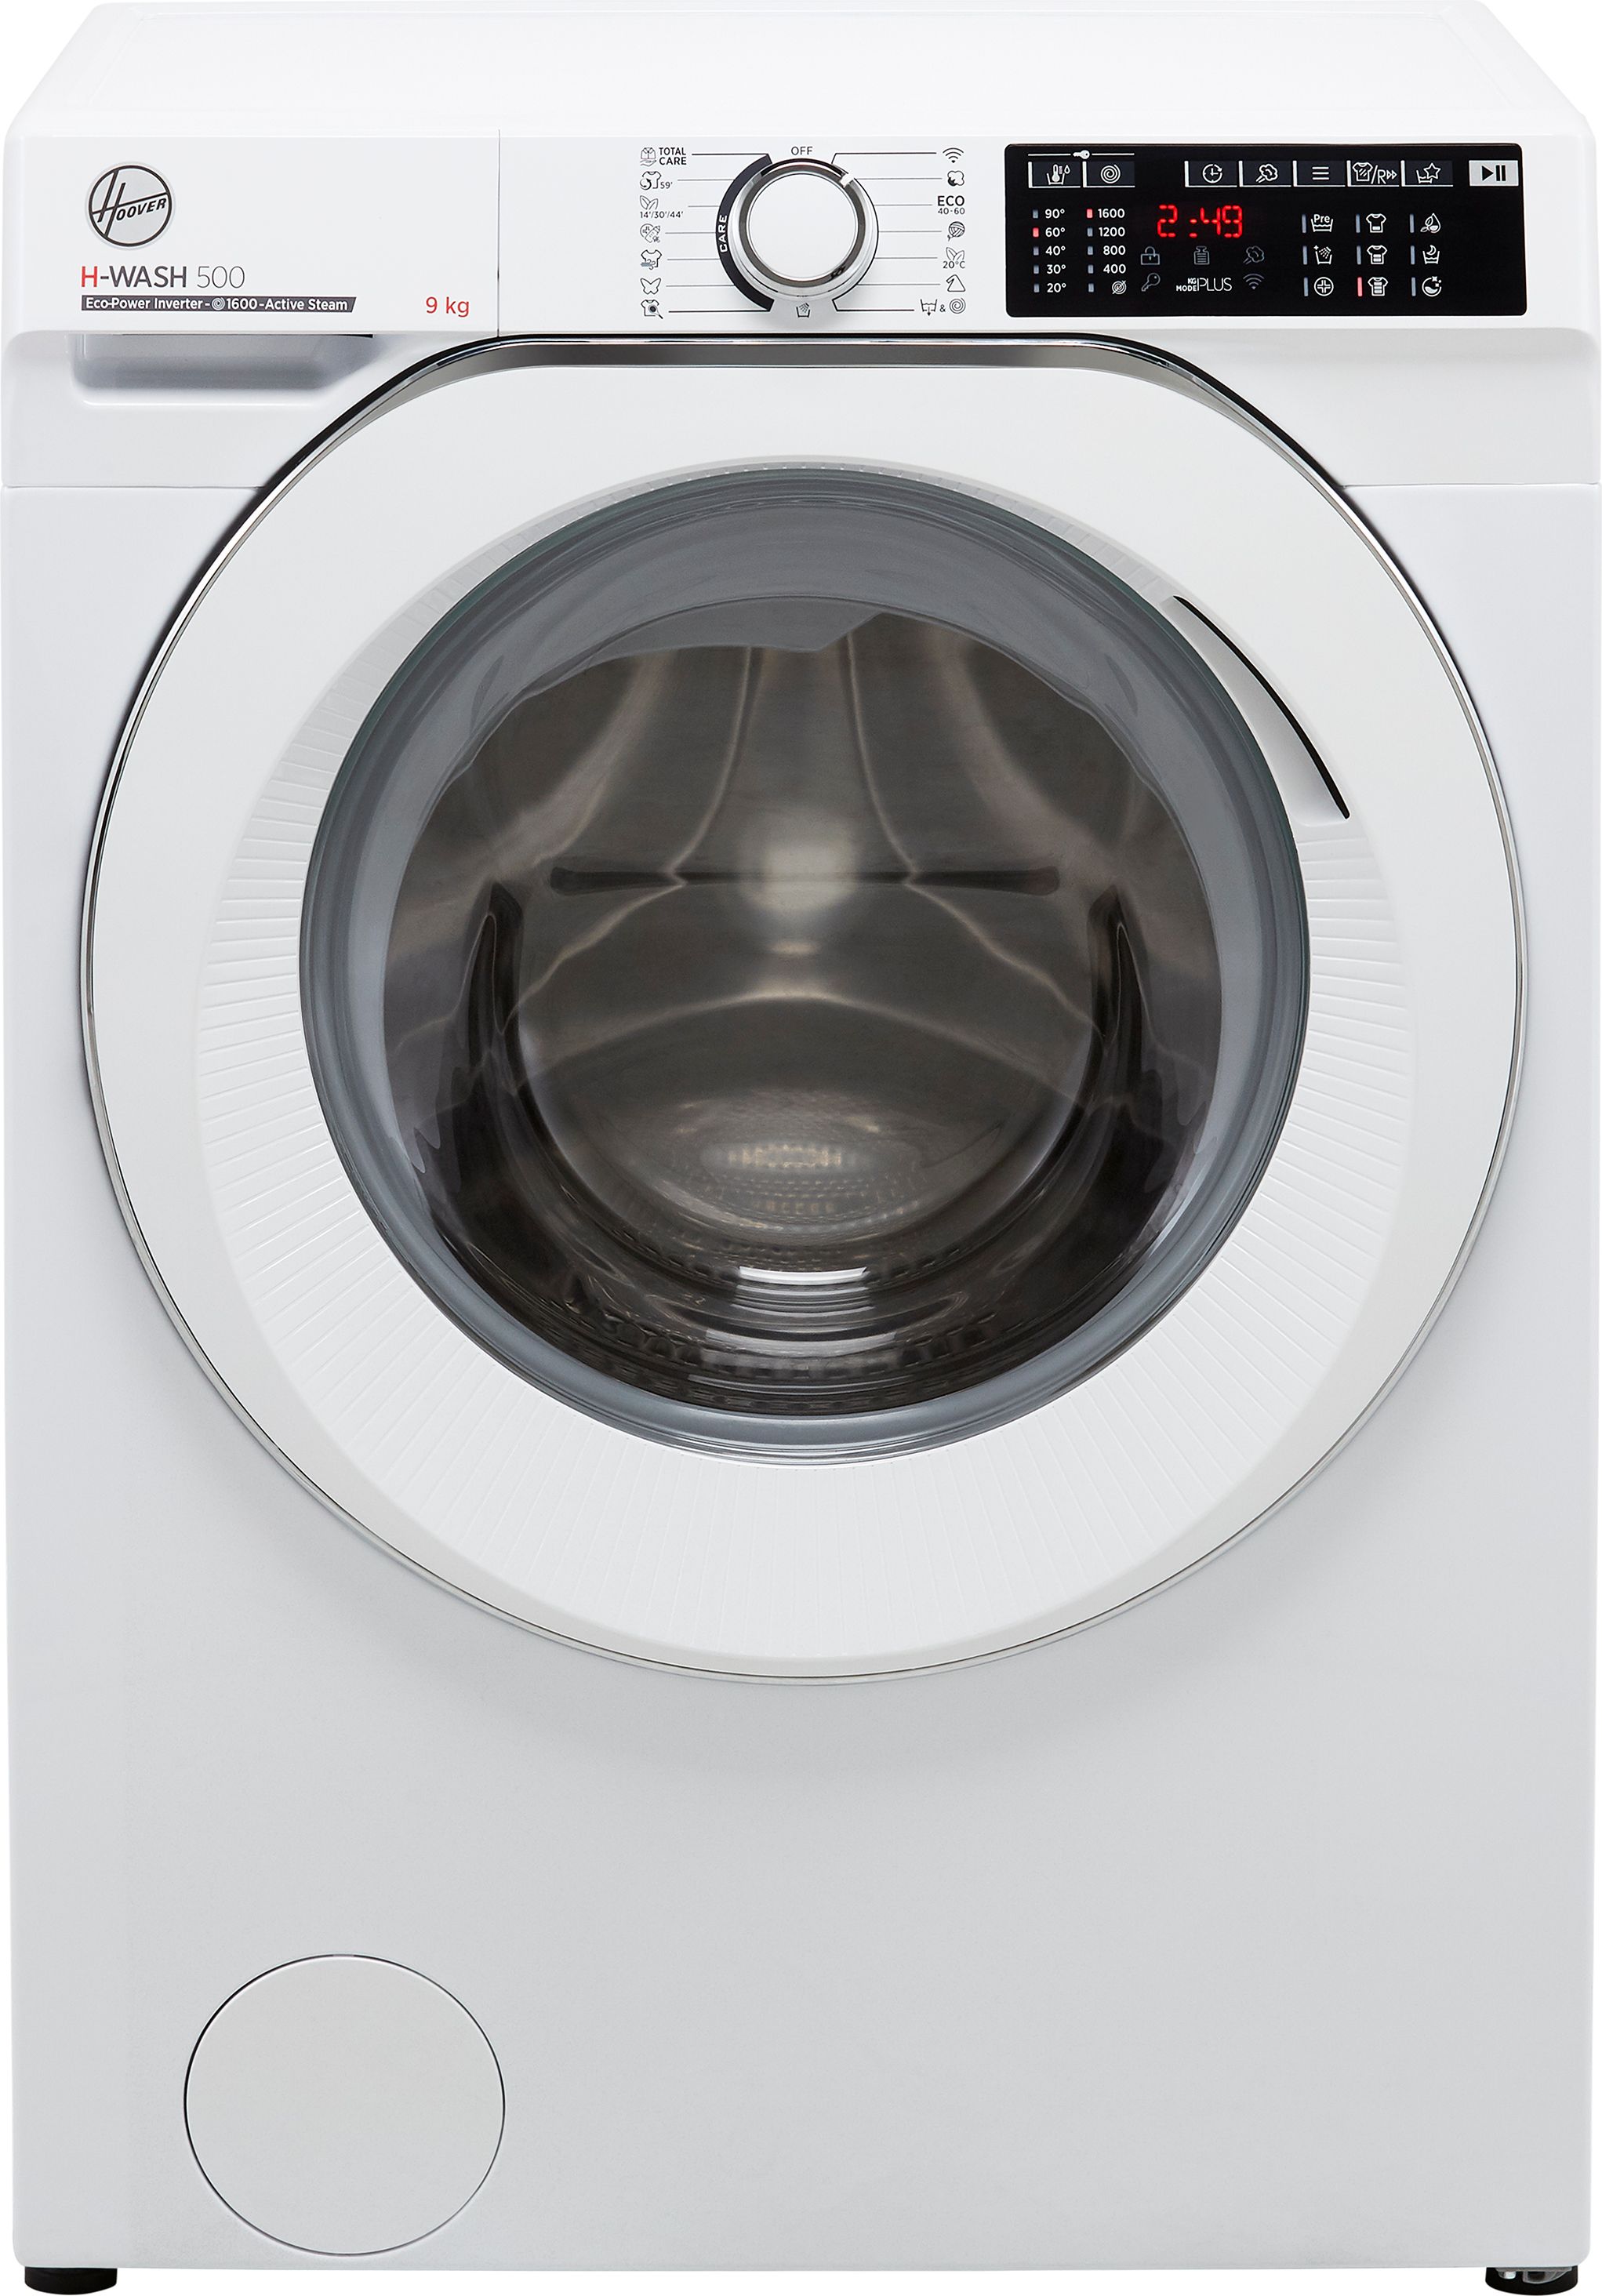 Hoover H-WASH 500 HW69AMC/1 9kg Washing Machine with 1600 rpm - White - A Rated, White